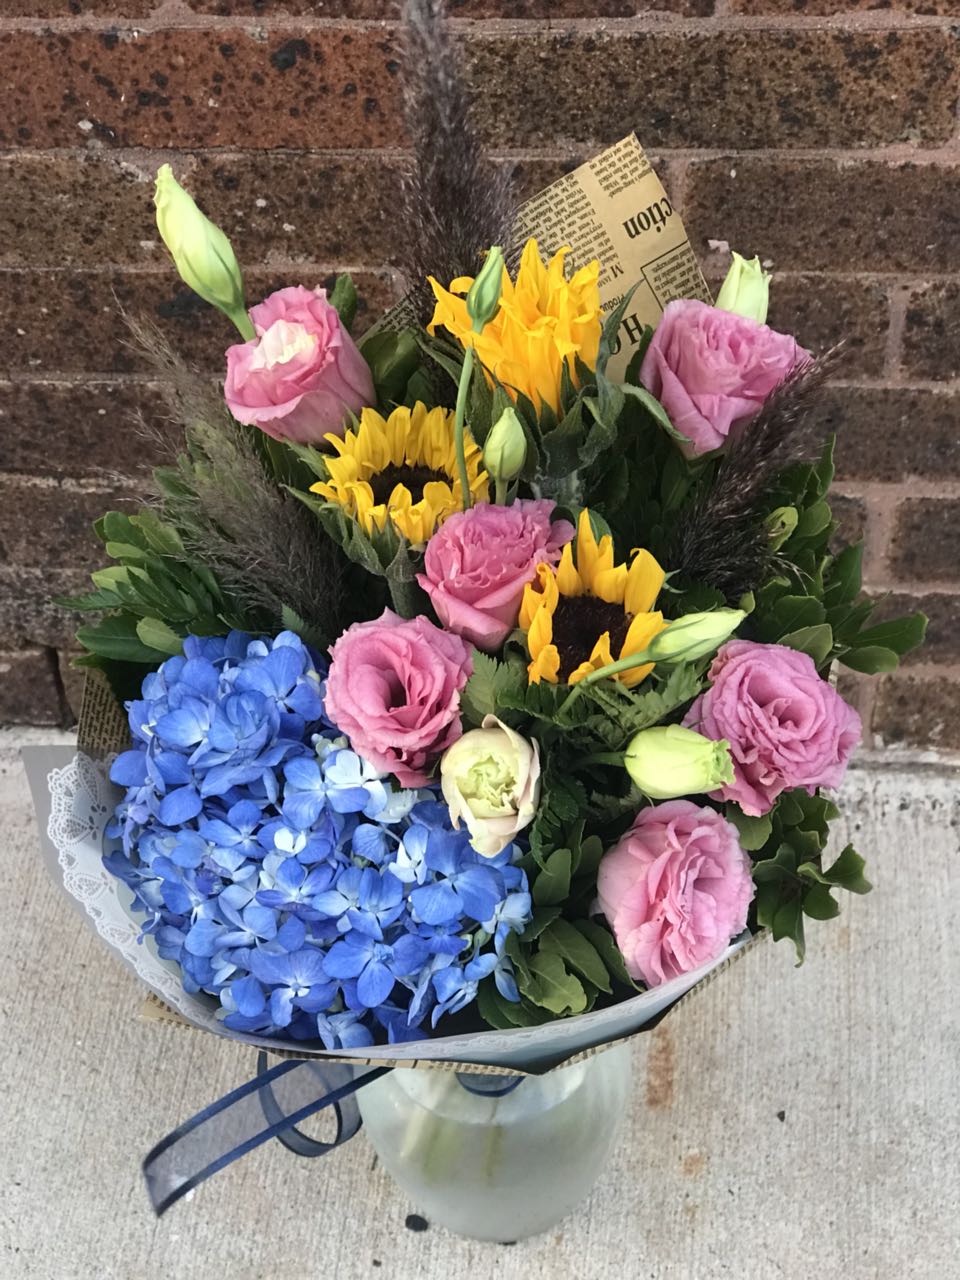 A simply splendid way to surprise someone special! This sophisticated, sunshiny arrangement of hydrangea and roses is an instant pick-me-up!  Includes:  Blue hydrangea, pink lisianthus, sunflowers, assorted greens. Wrapped in a craft paper. Free message card